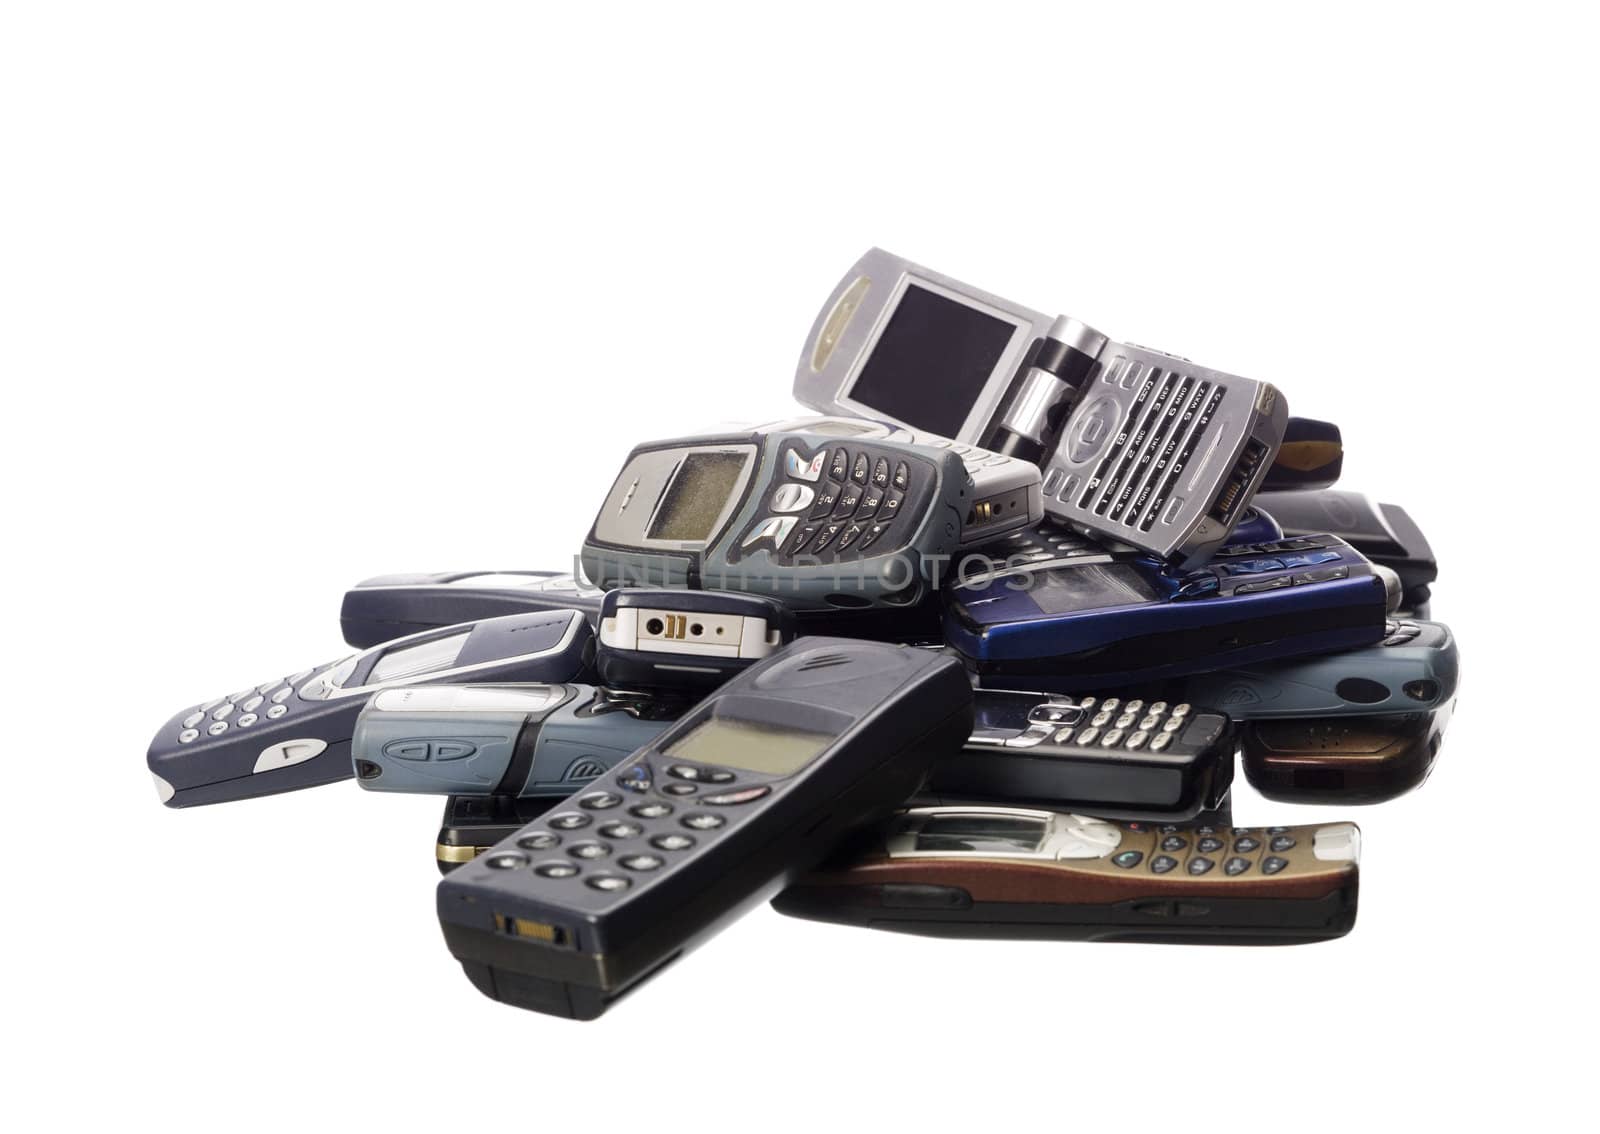 Stack of cellphones by gemenacom